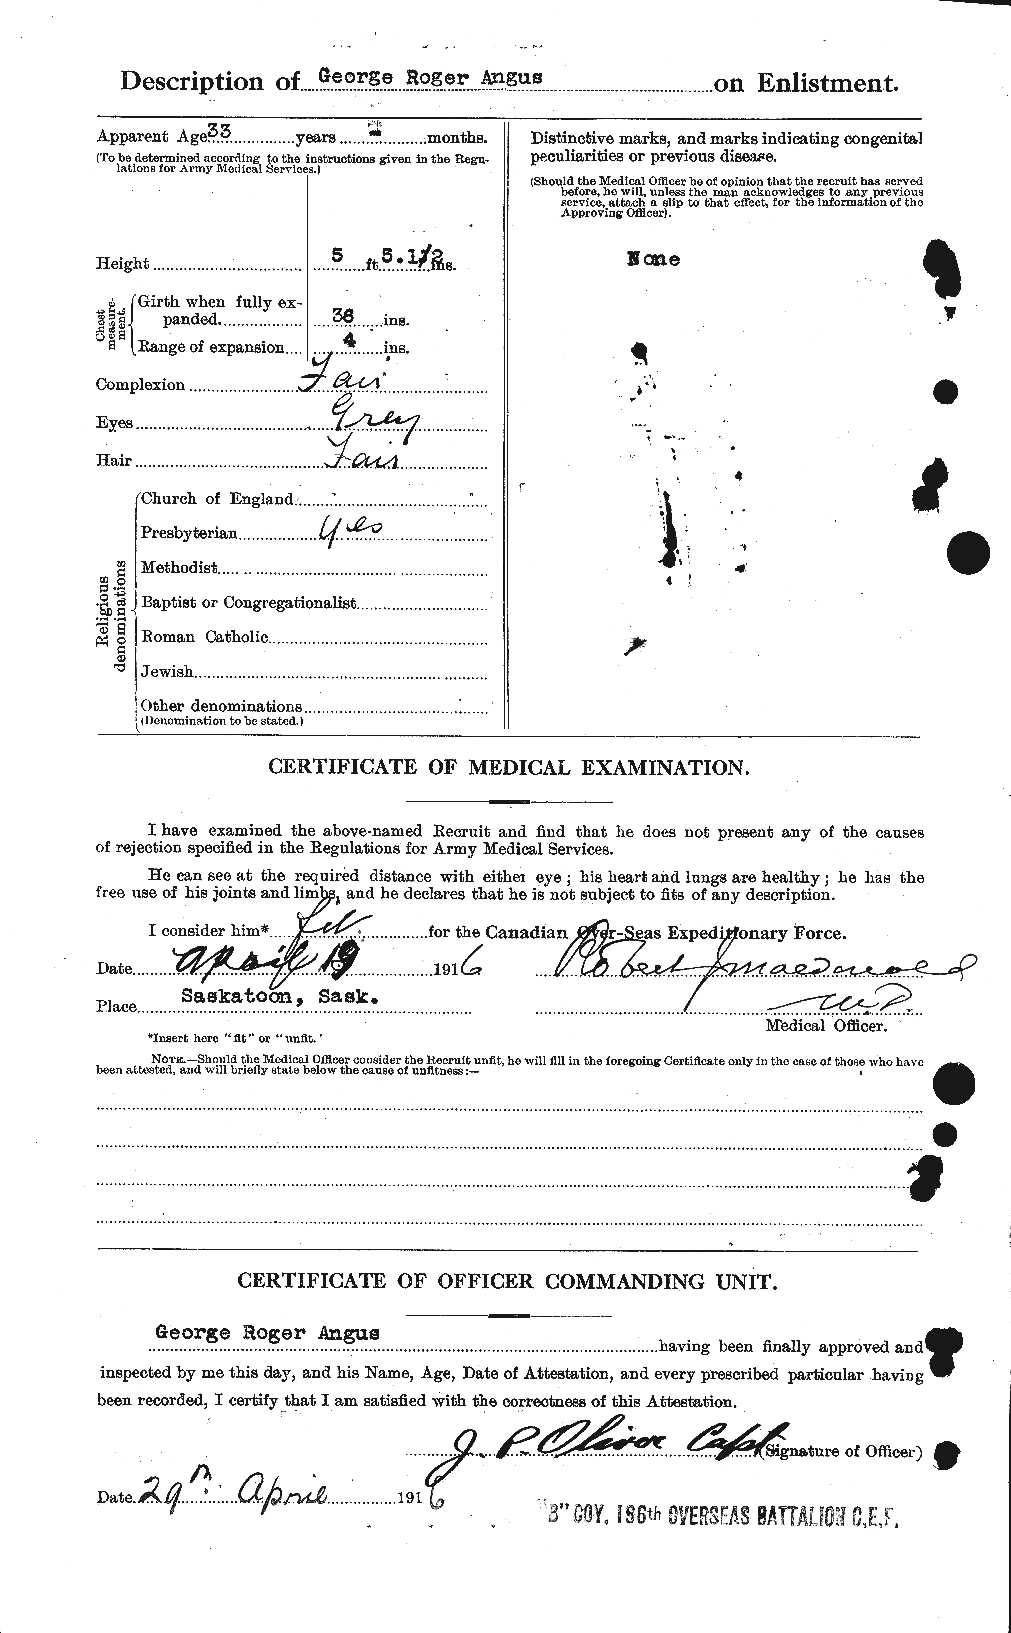 Personnel Records of the First World War - CEF 209089b